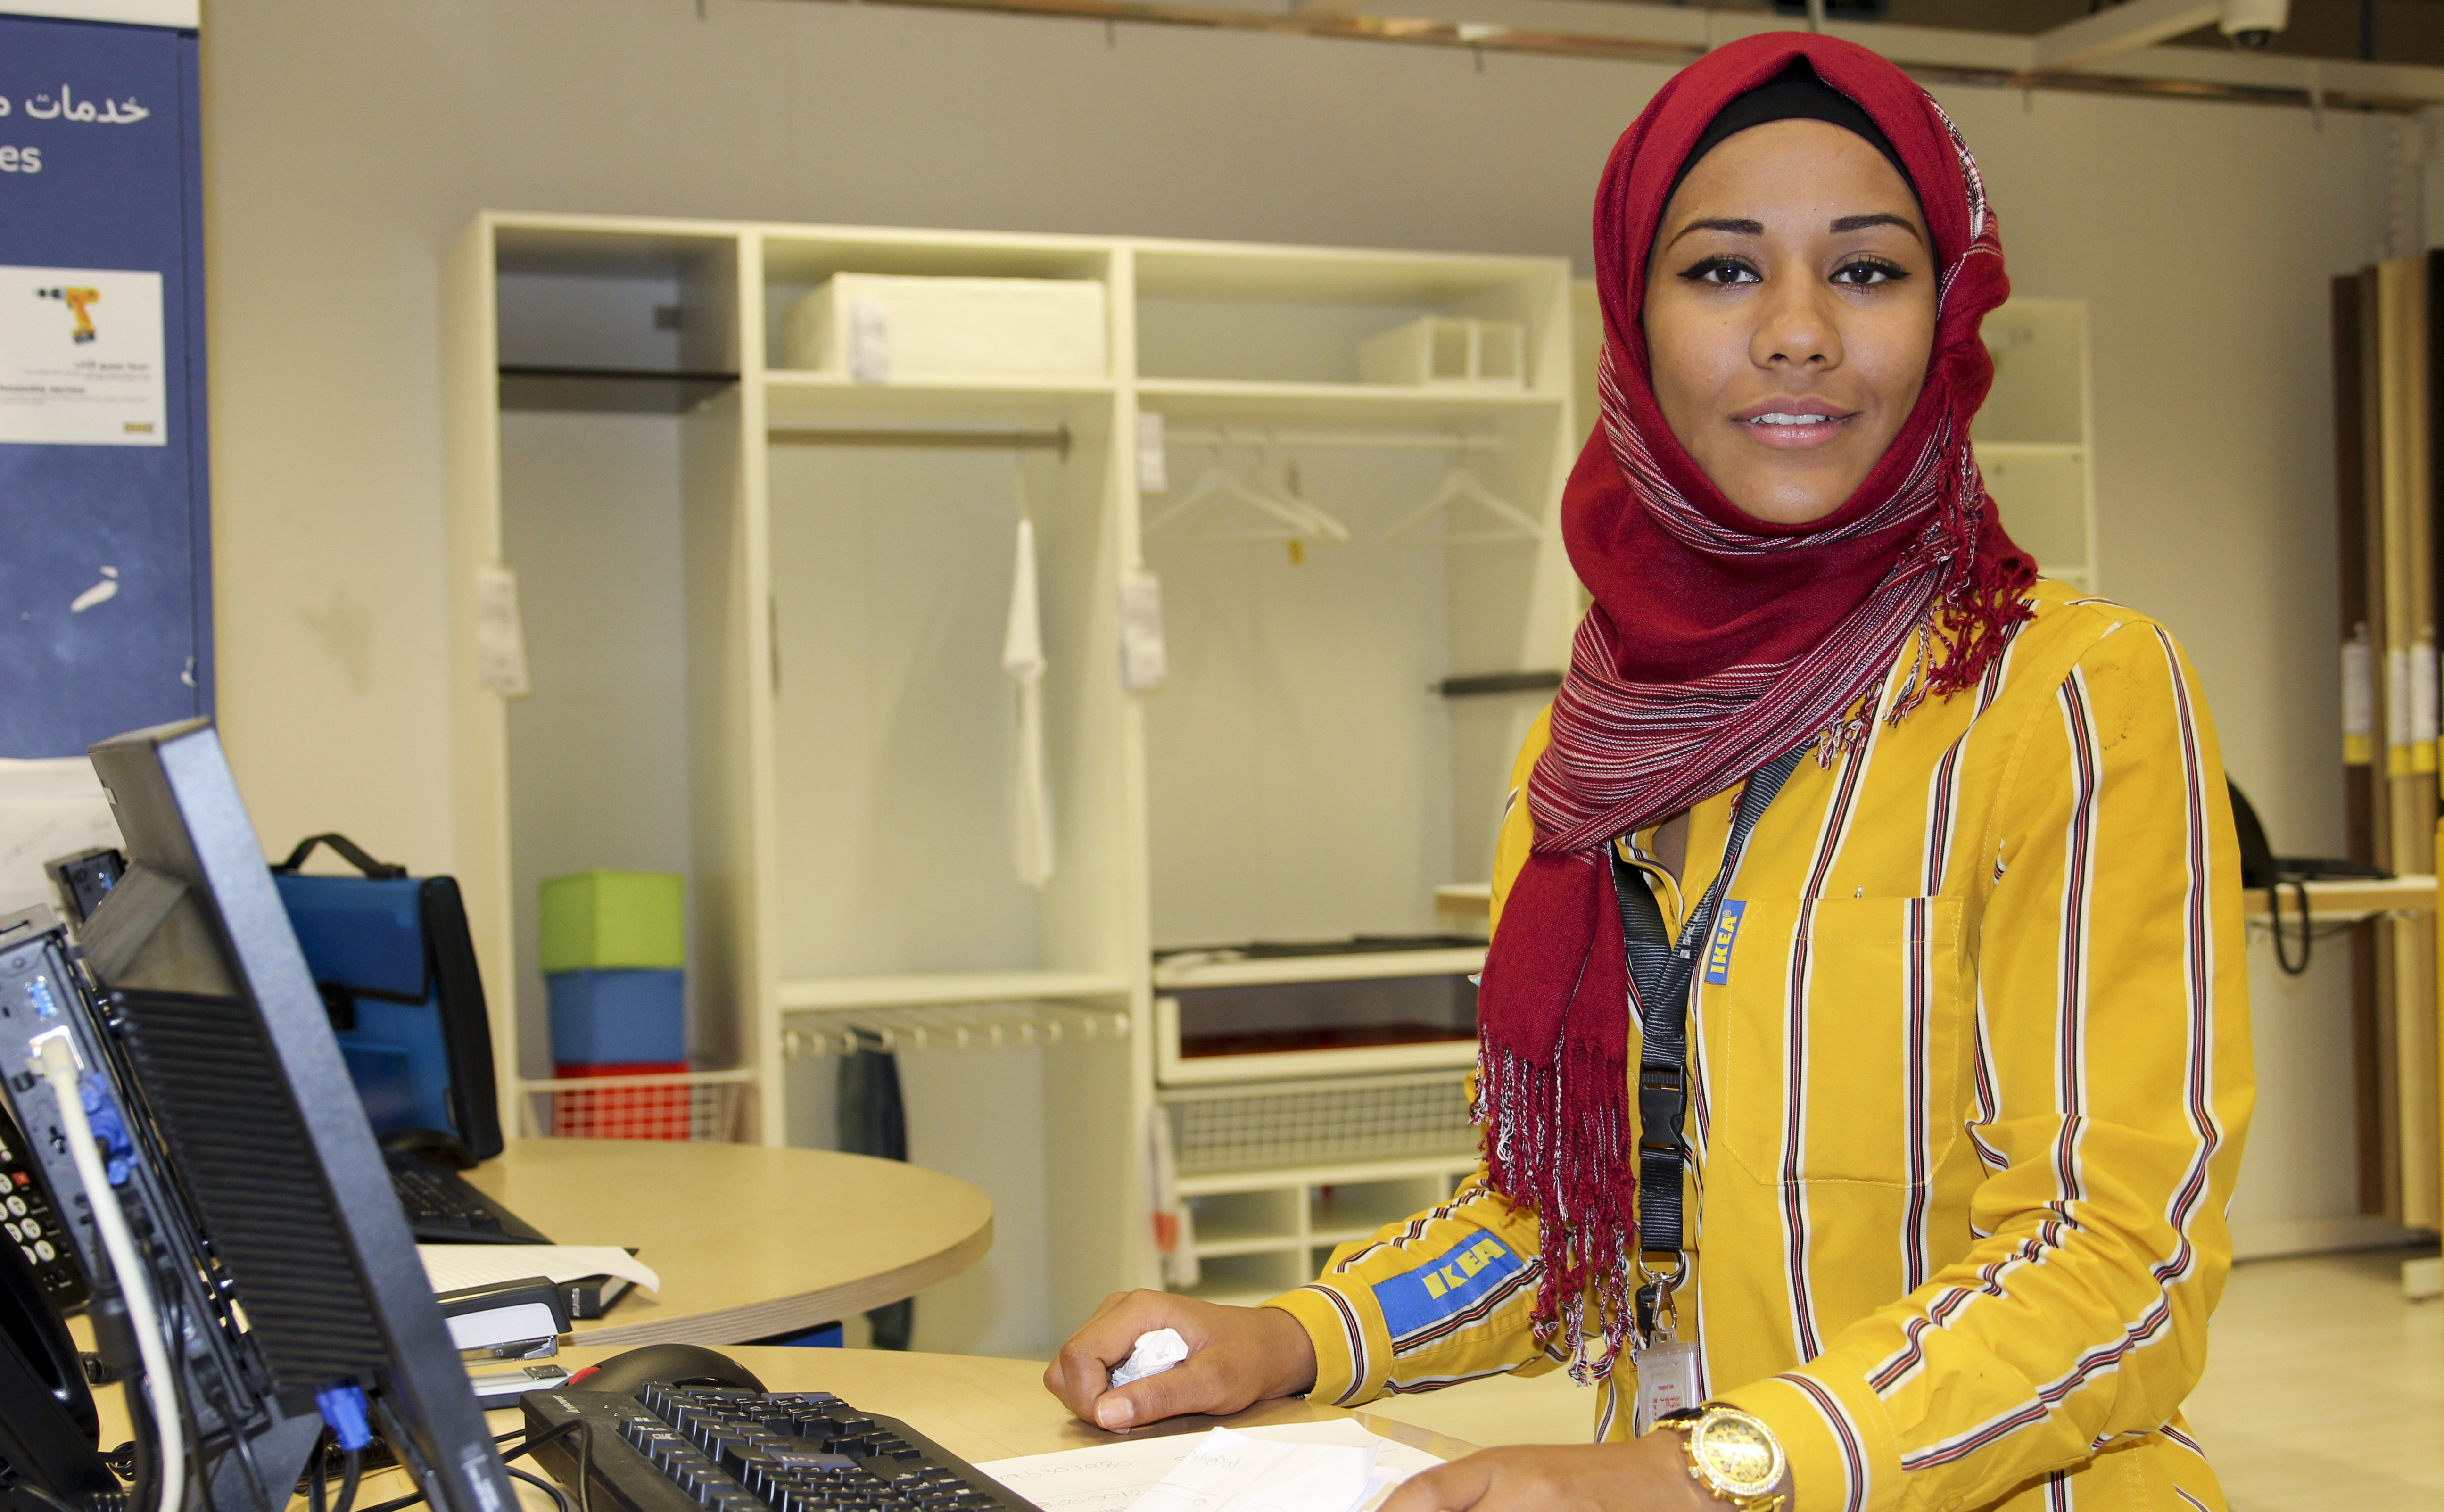 A Young Jordanian Perseveres, Overcoming Barriers to Land Her Dream Job Hero Image